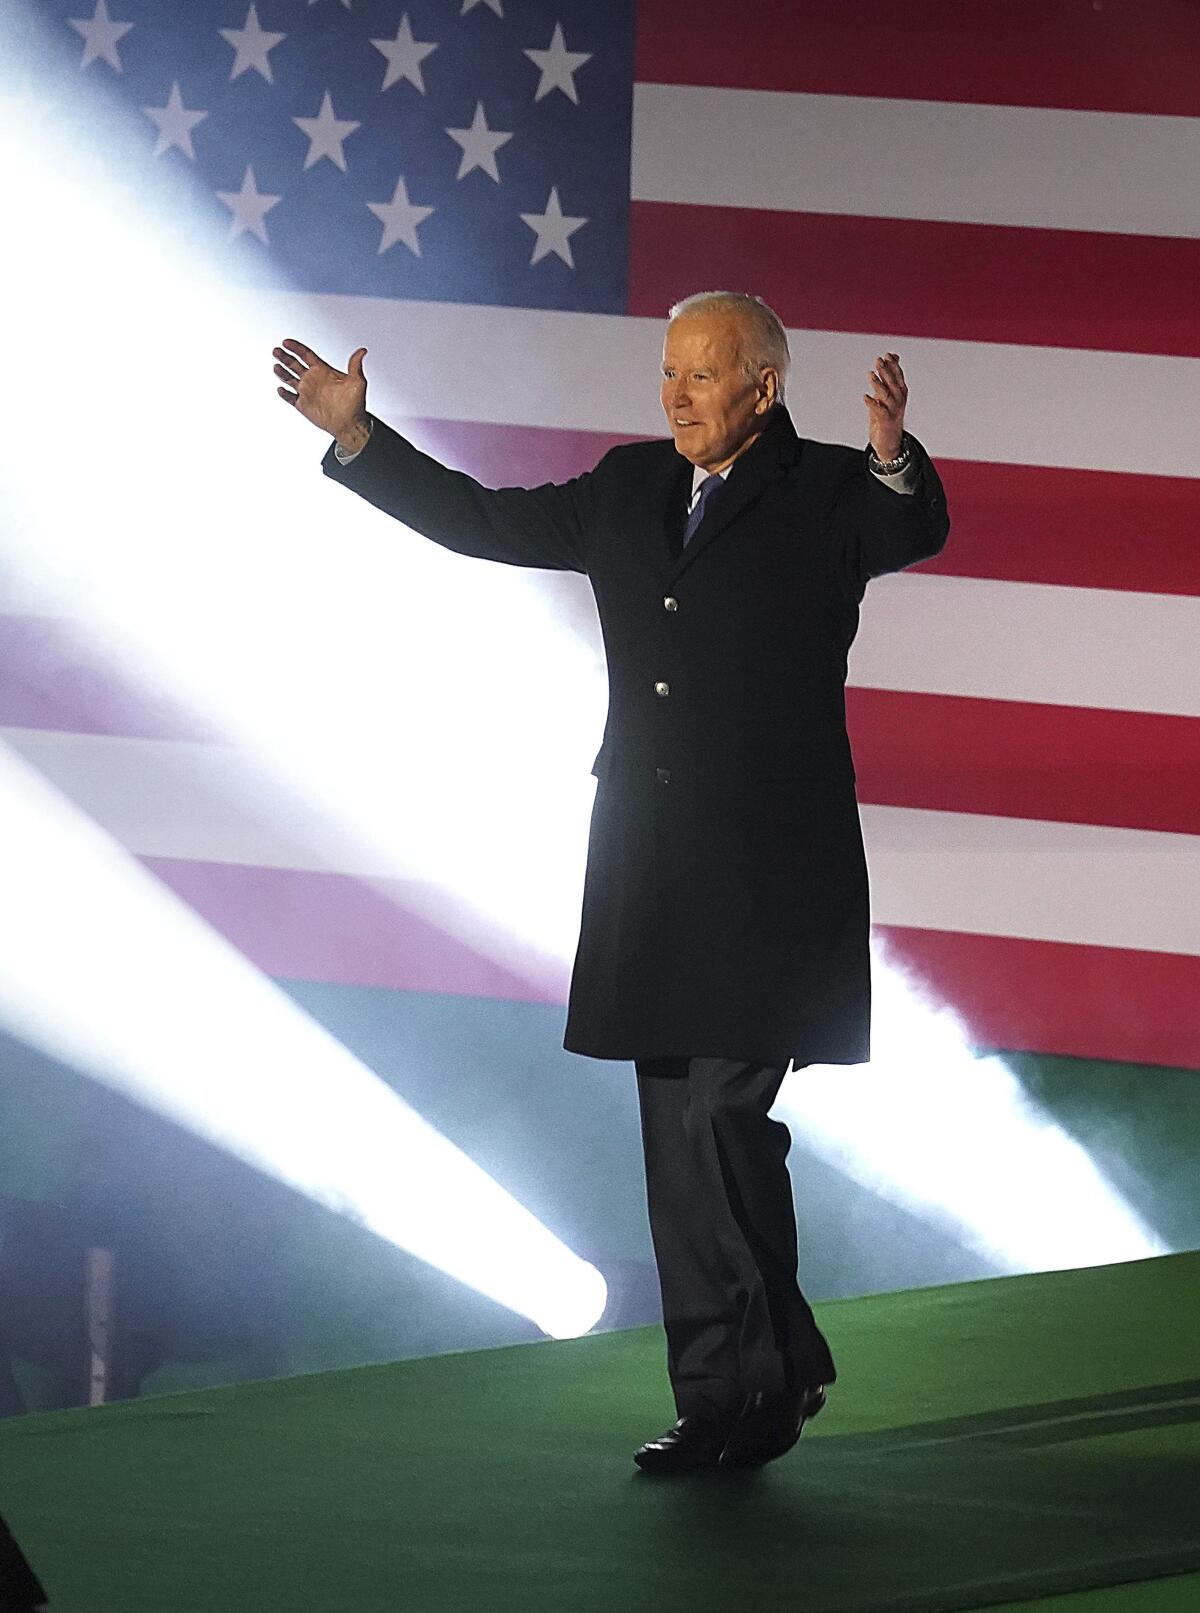 Joe Biden, with his arms outstretched, walks onto a stage with a large American flag as a backdrop